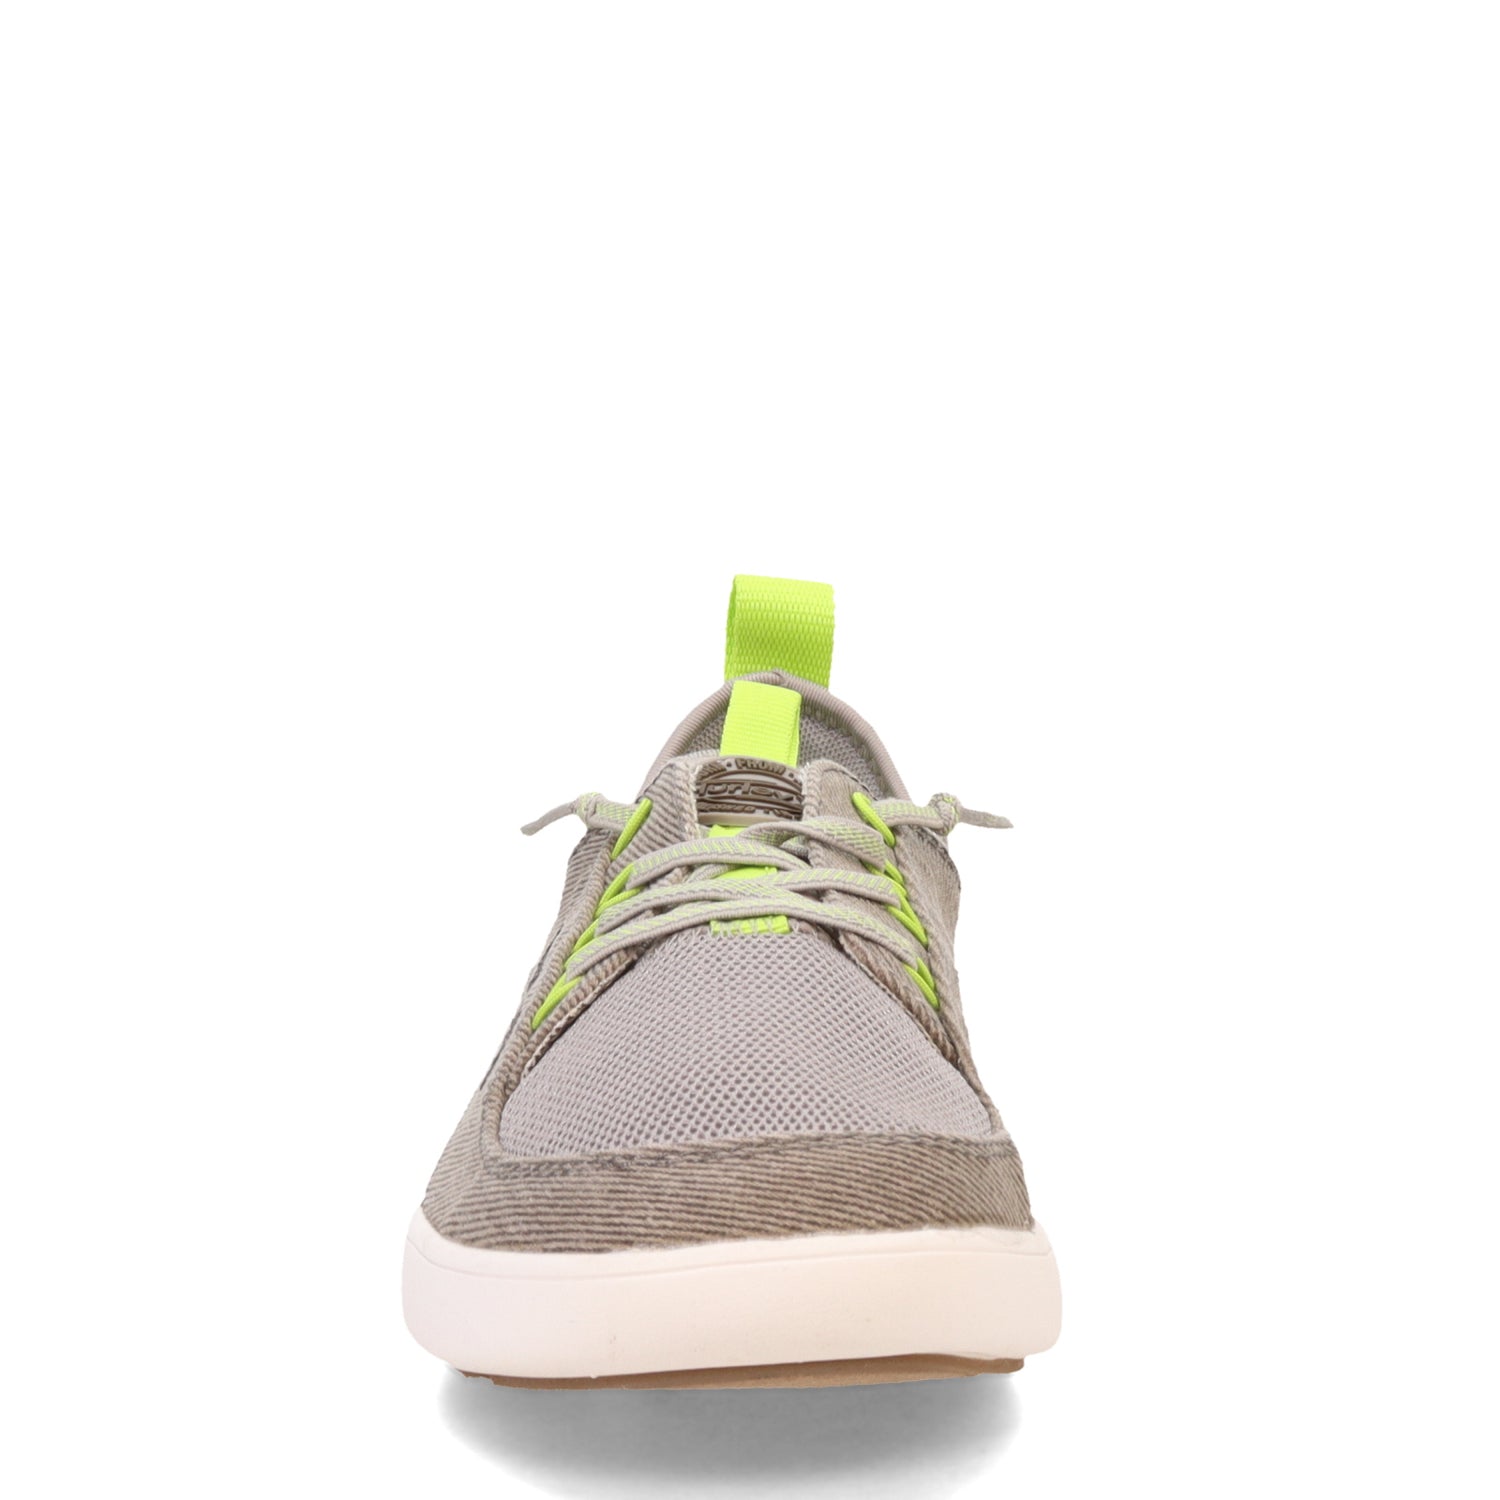 Peltz Shoes  Men's Hurley Castaic Sneaker Taupe CASTAIC-TAUPE